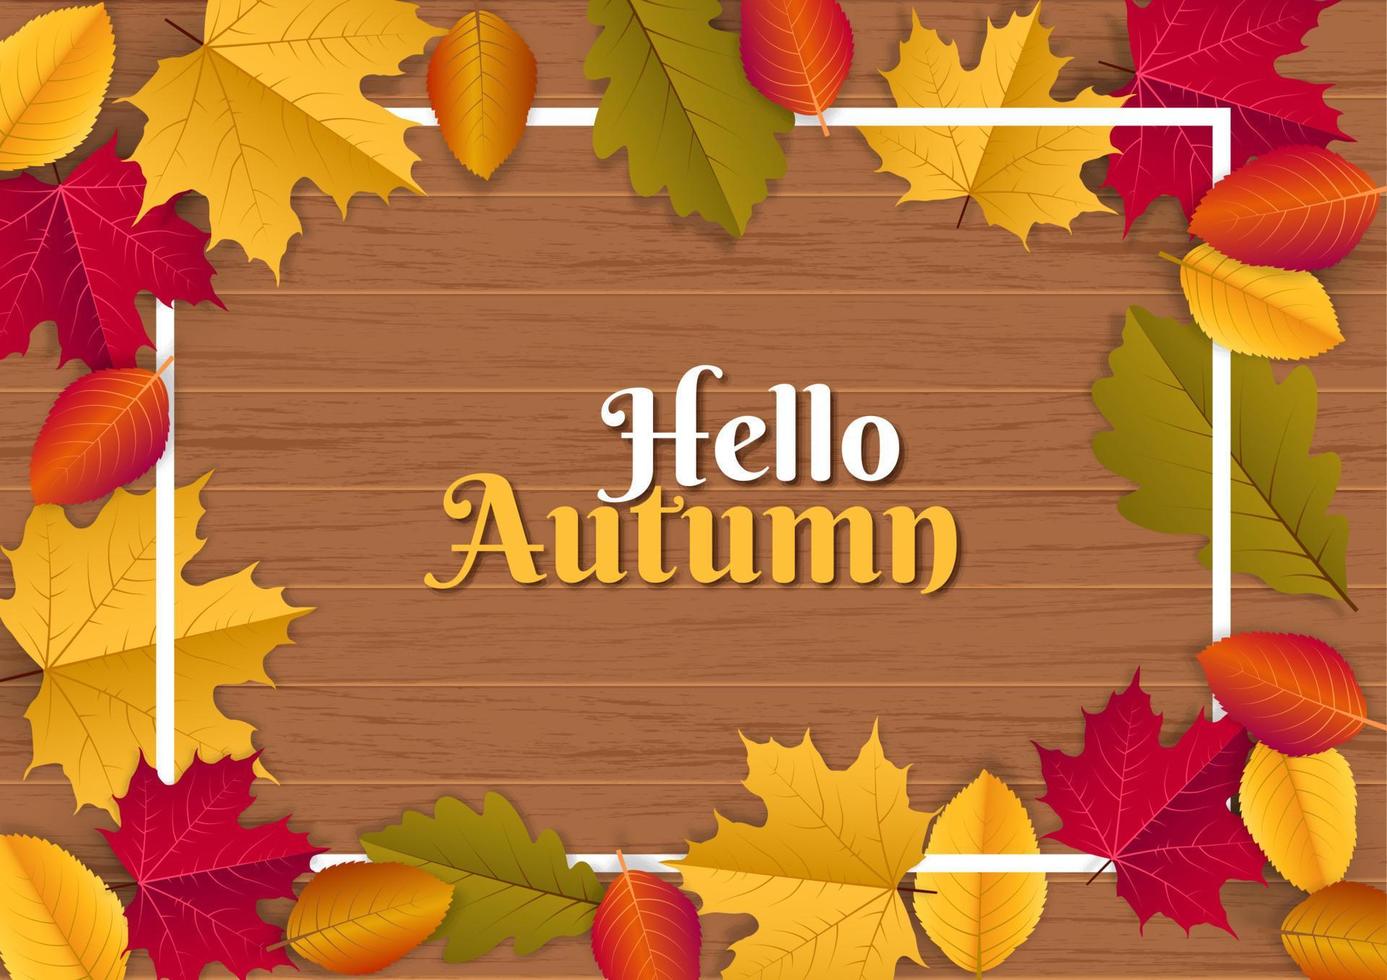 Autumn seasonal holiday illustration with scattered leaves vector